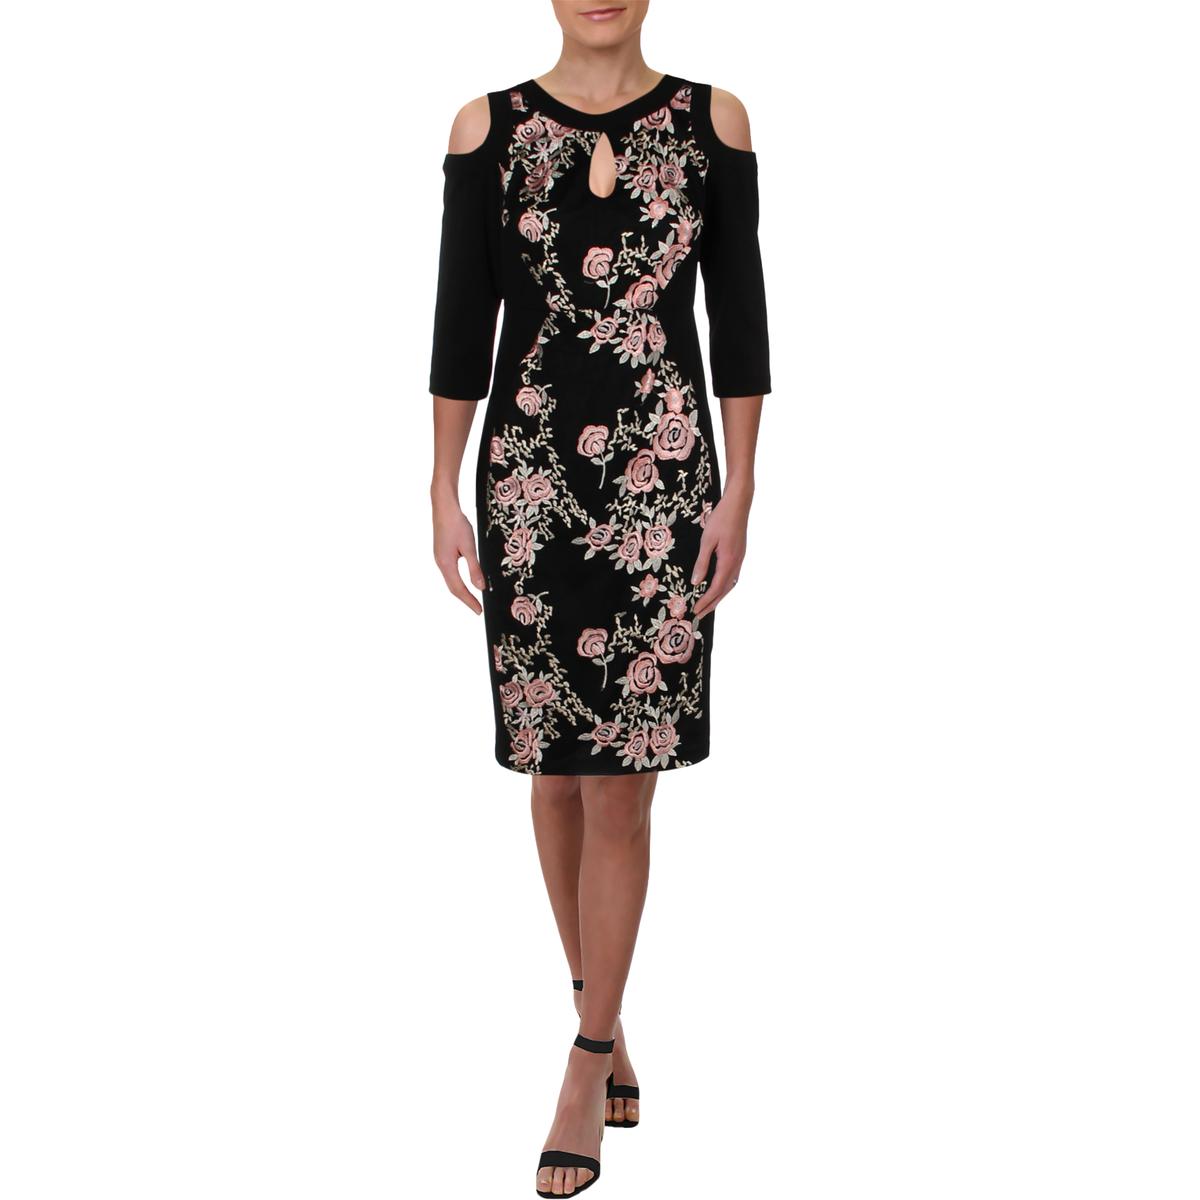 Jax Black Label Womens Black Floral Embroidered Party Cocktail Dress 2 ...